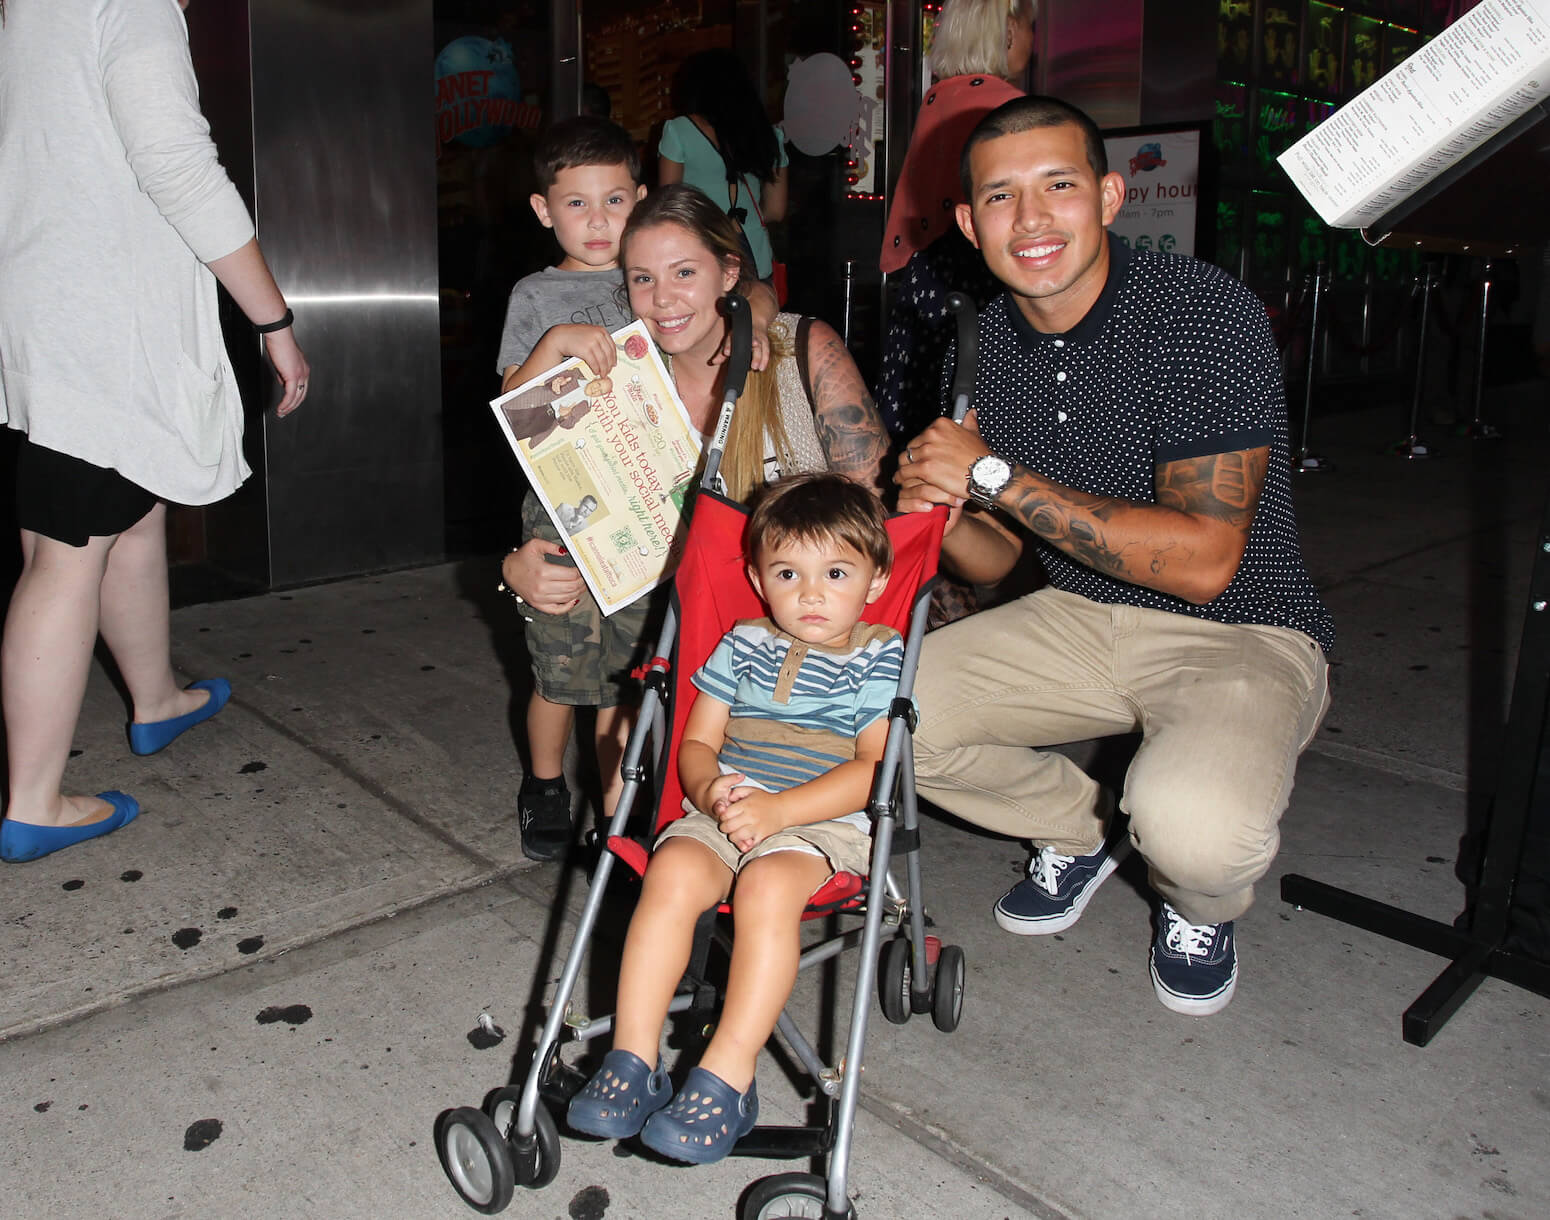 'Teen Mom 2' star Kailyn Lowry and Javi Marroquin with sons Lincoln and Isaac